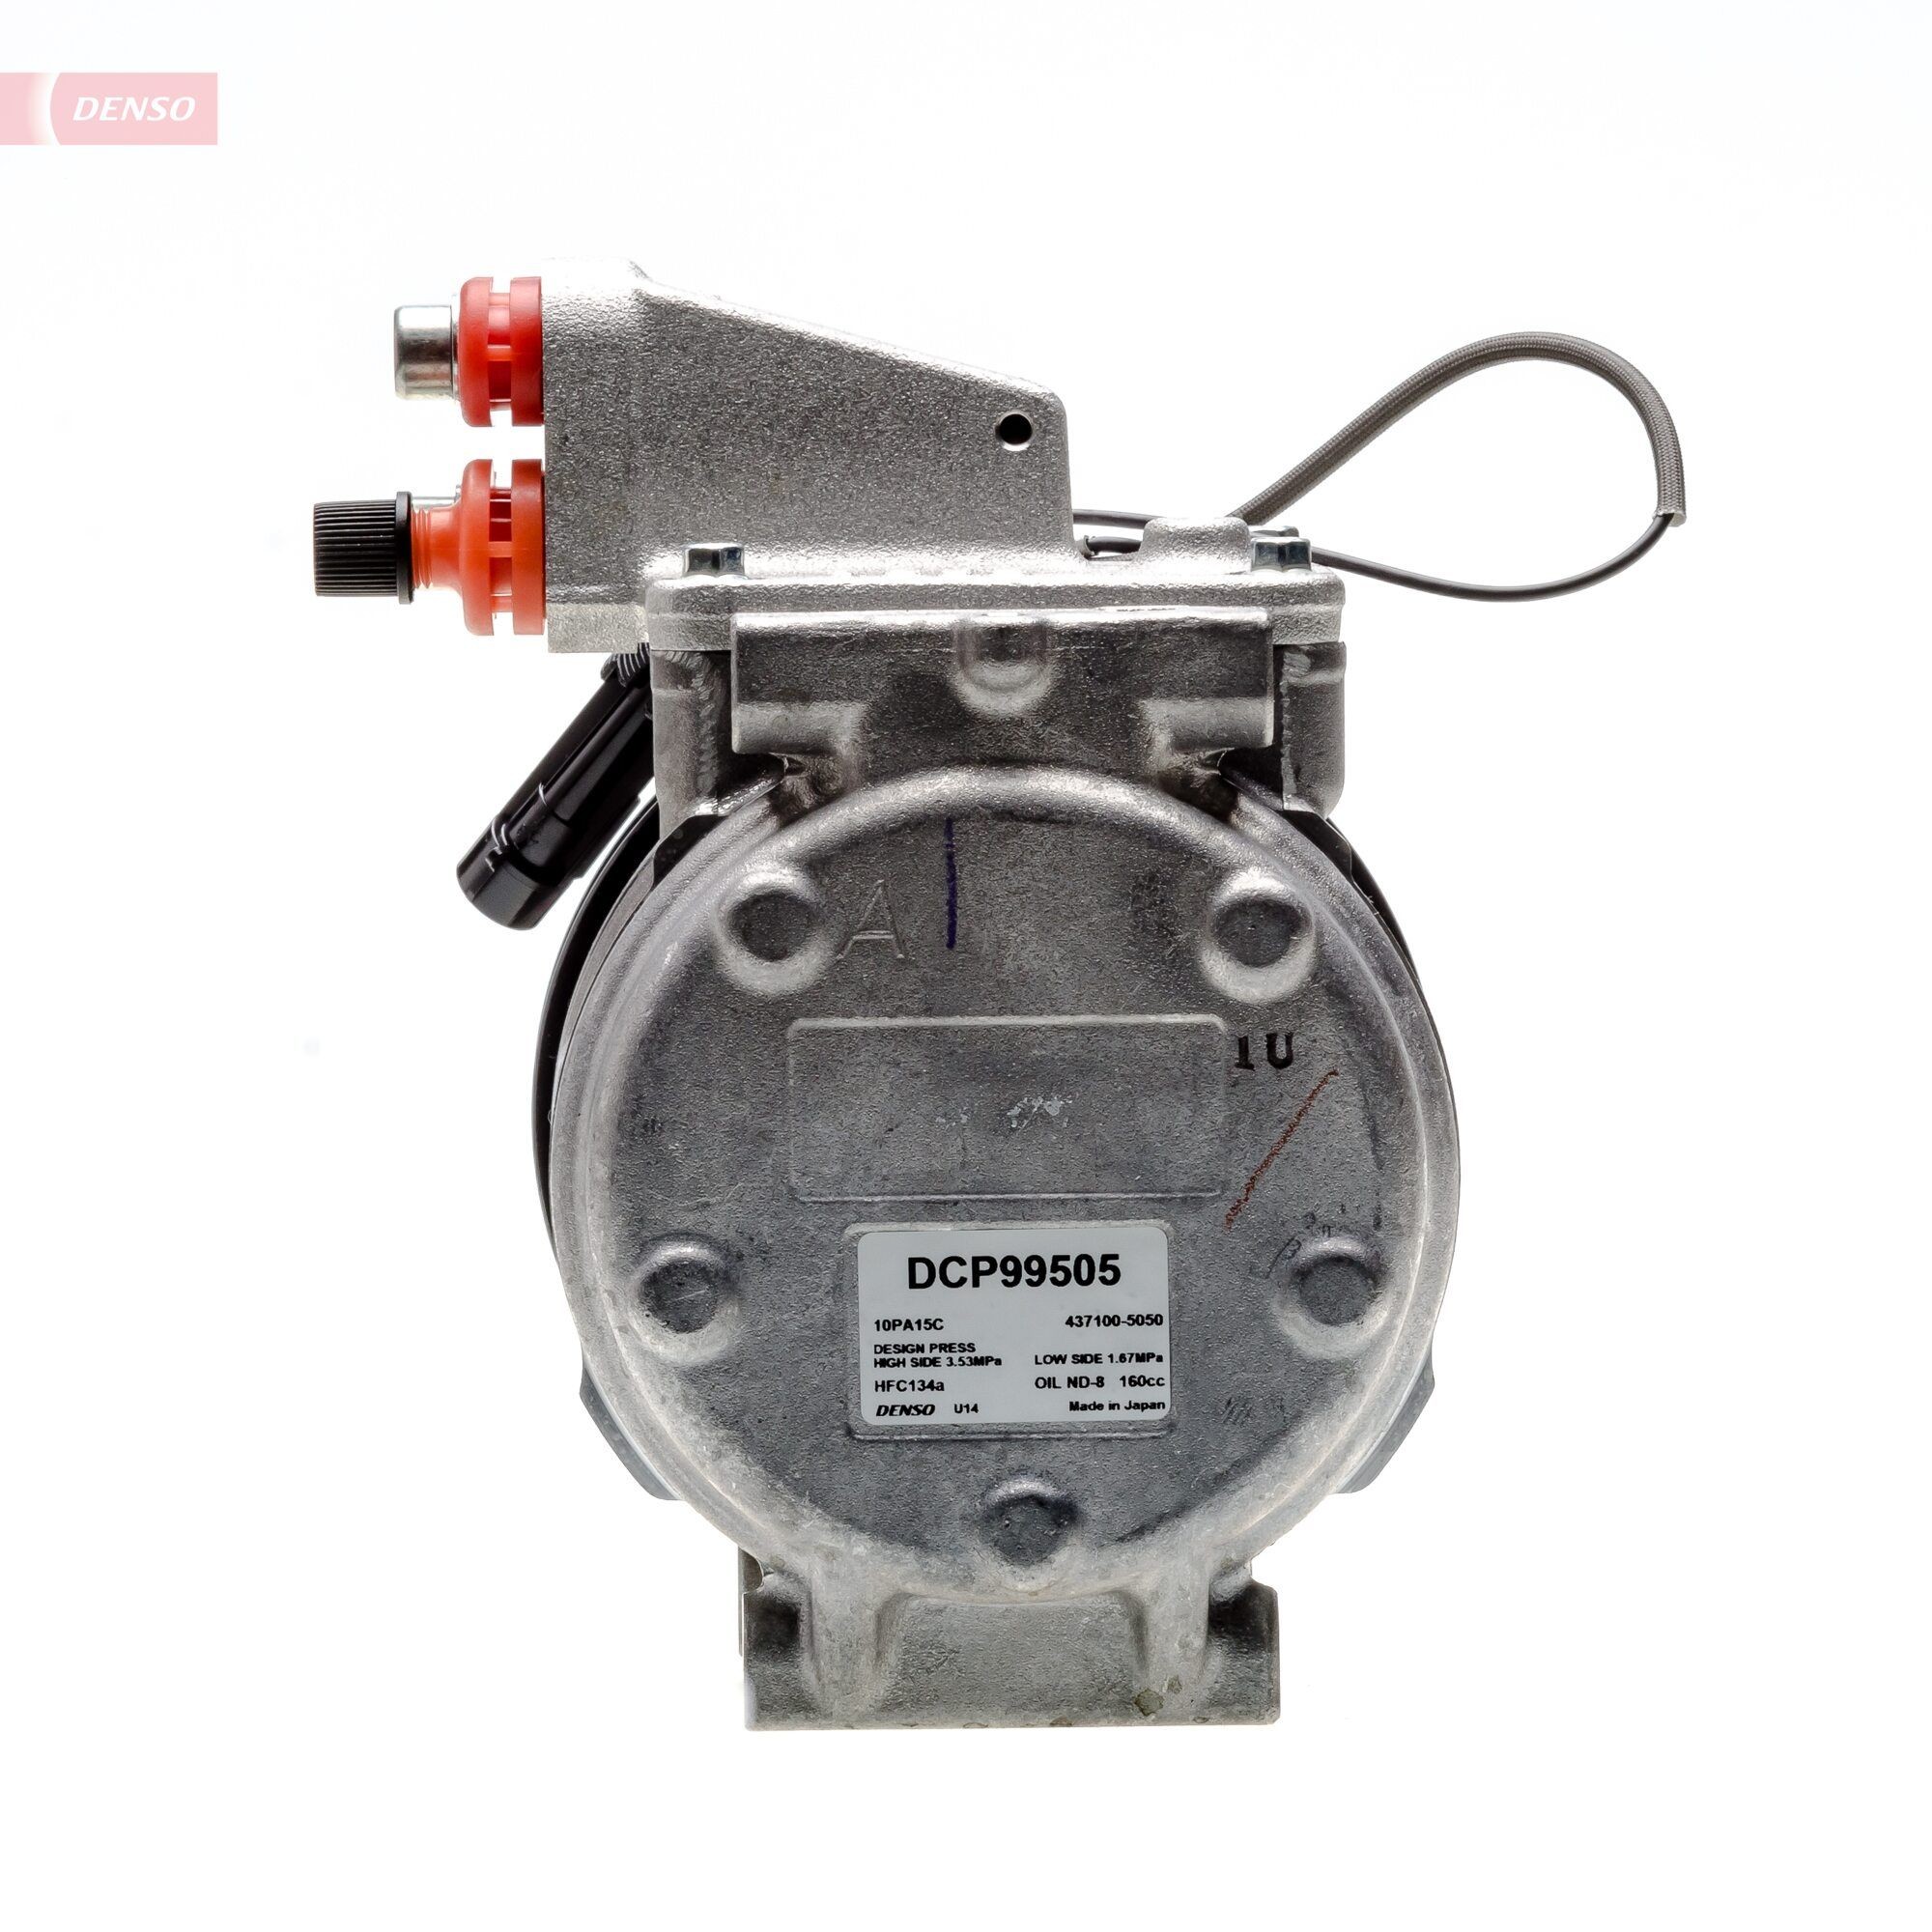 DENSO DCP99505 Air conditioner compressor 10PA15C, 12V, PAG 46, R 134a, with magnetic clutch